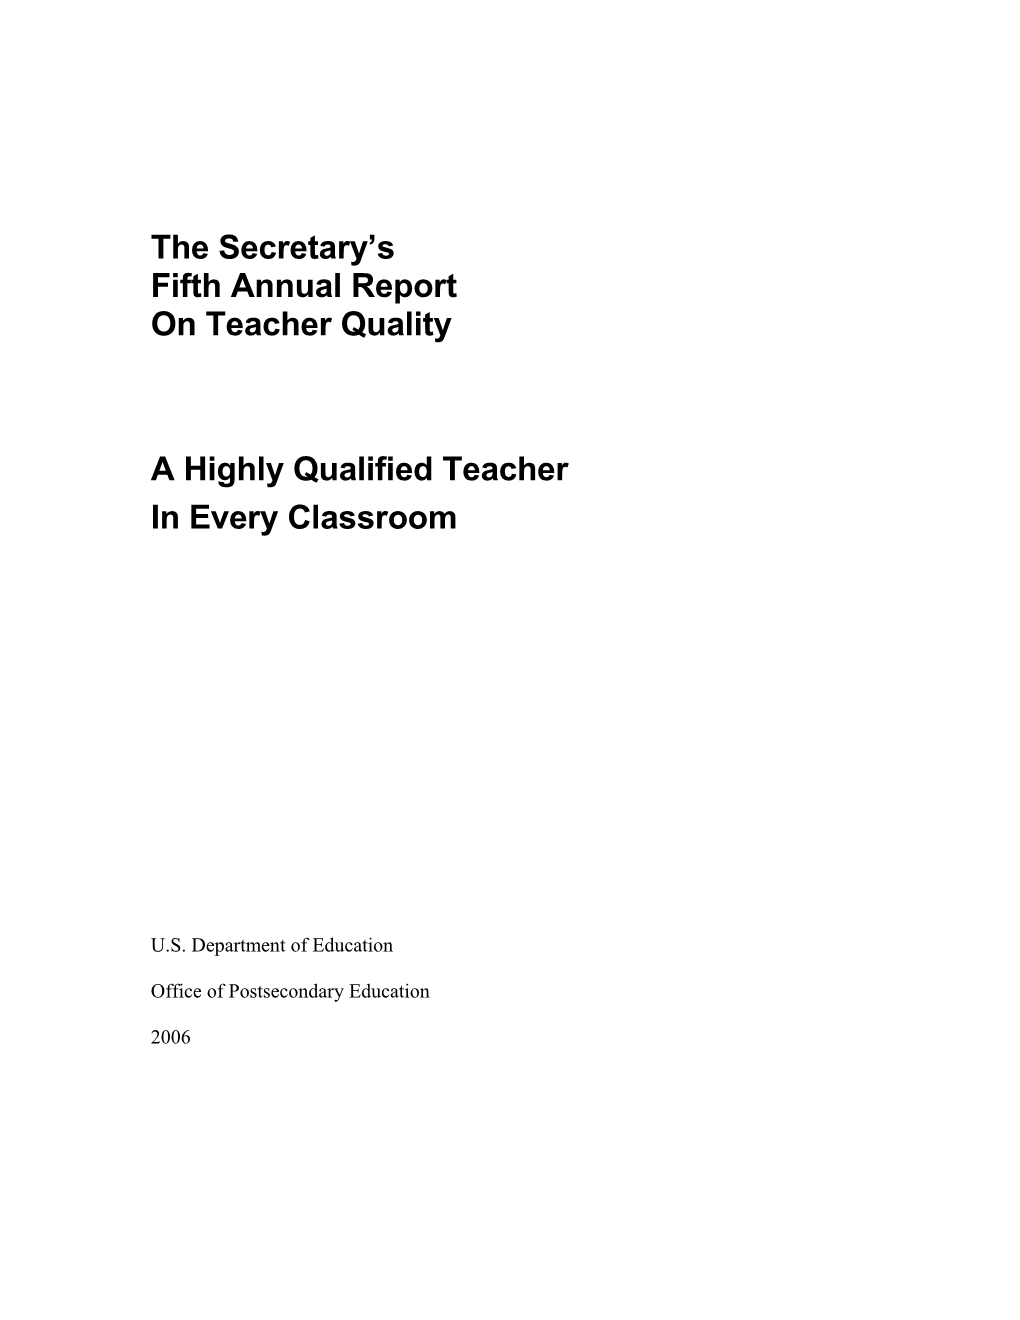 The Secretary's Fifthe Annual Report on Teacher Quality (MS Word)